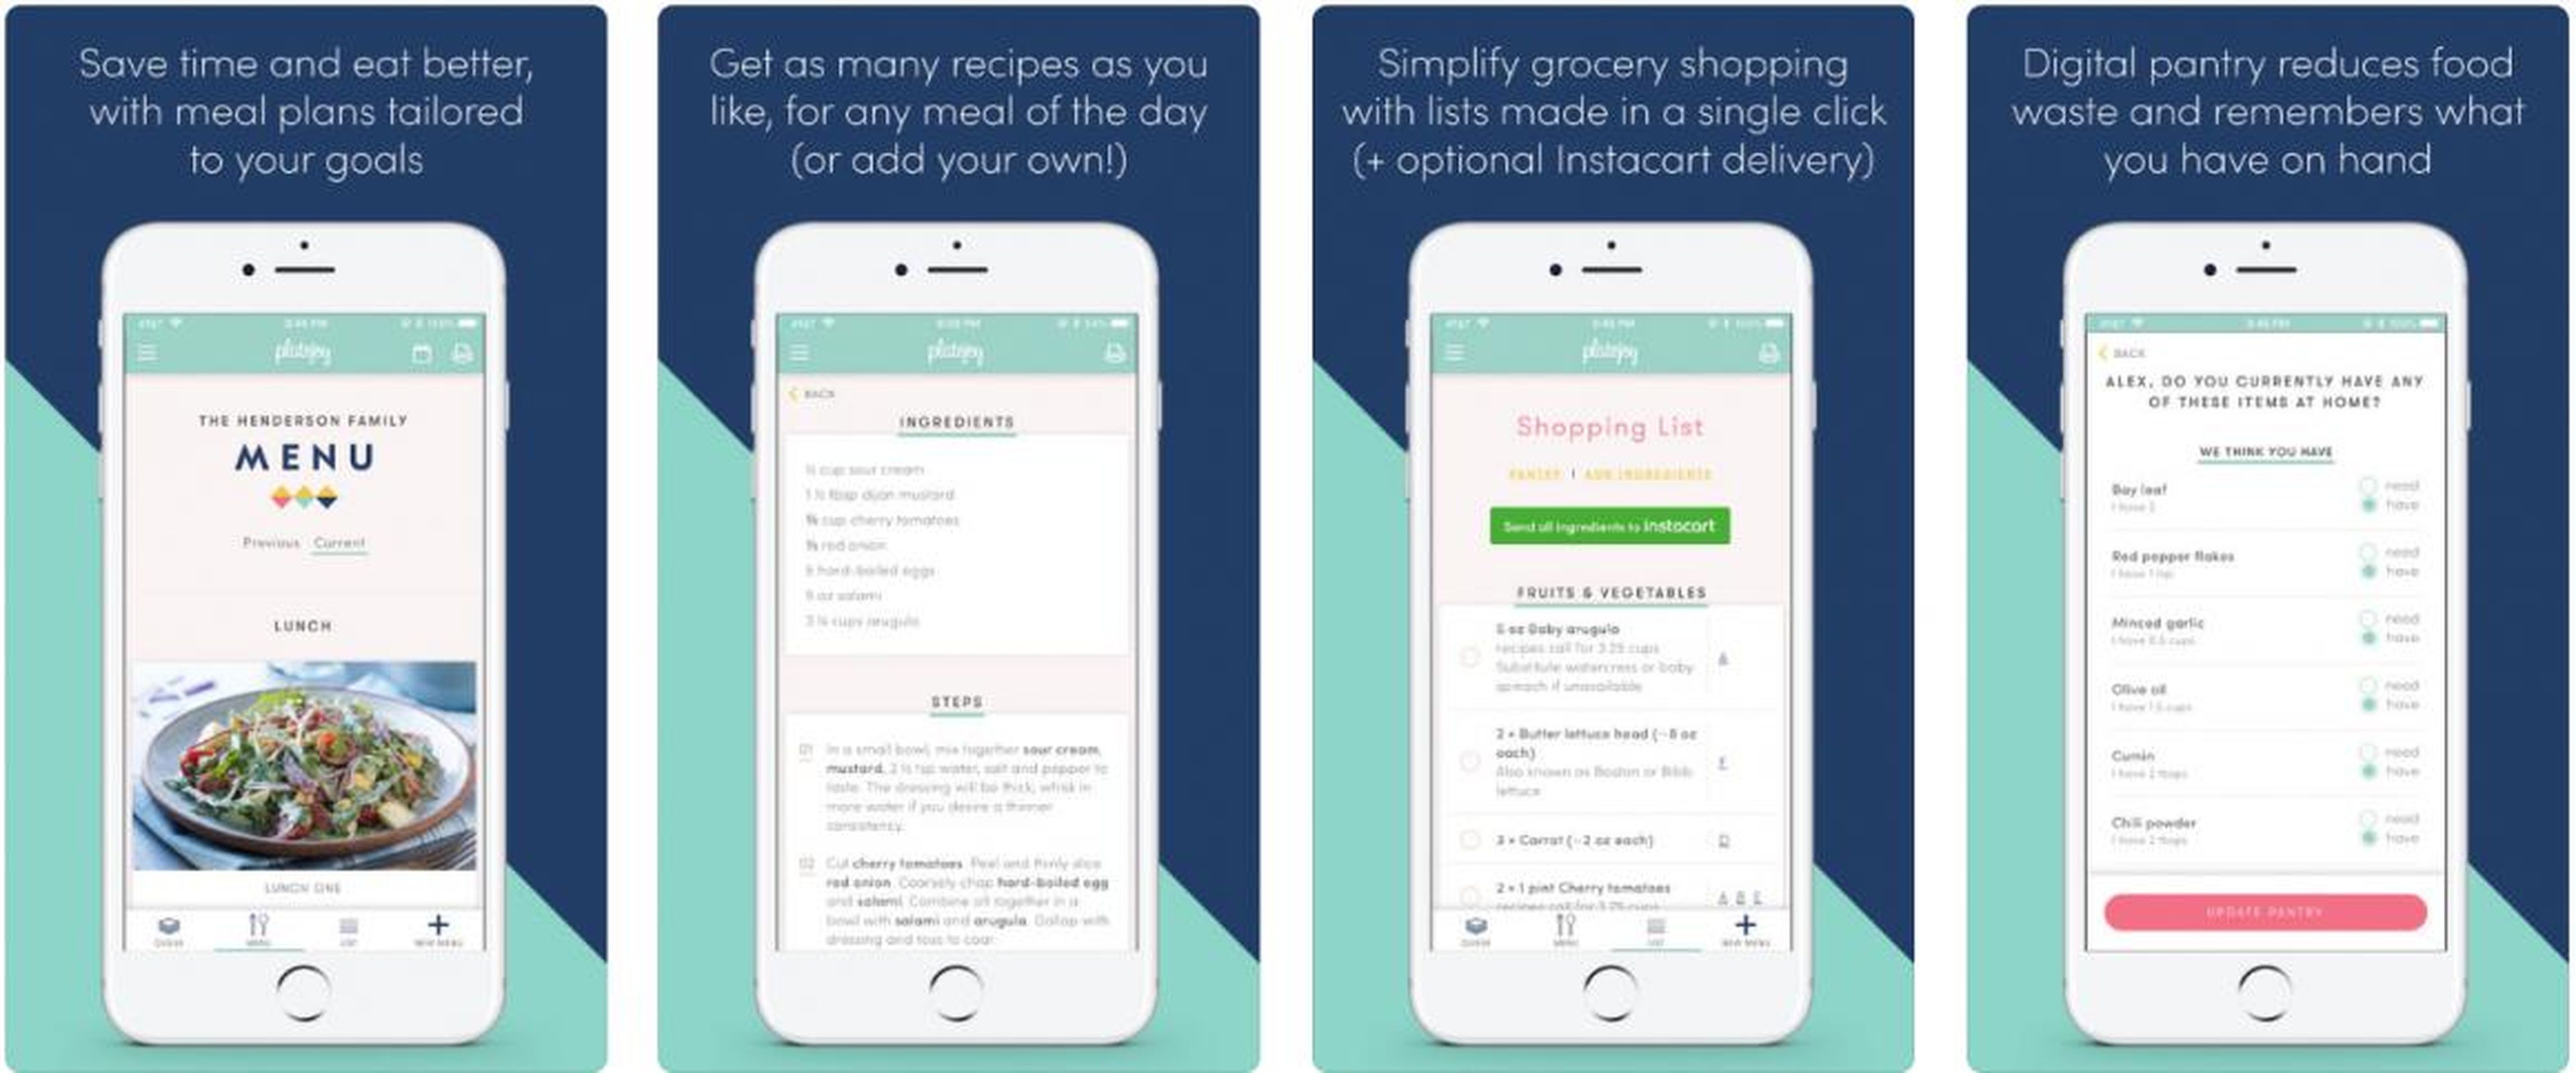 PlateJoy tailors recipes to your needs or preferences and helps you save money by smartly using pantry items and fresh foods.